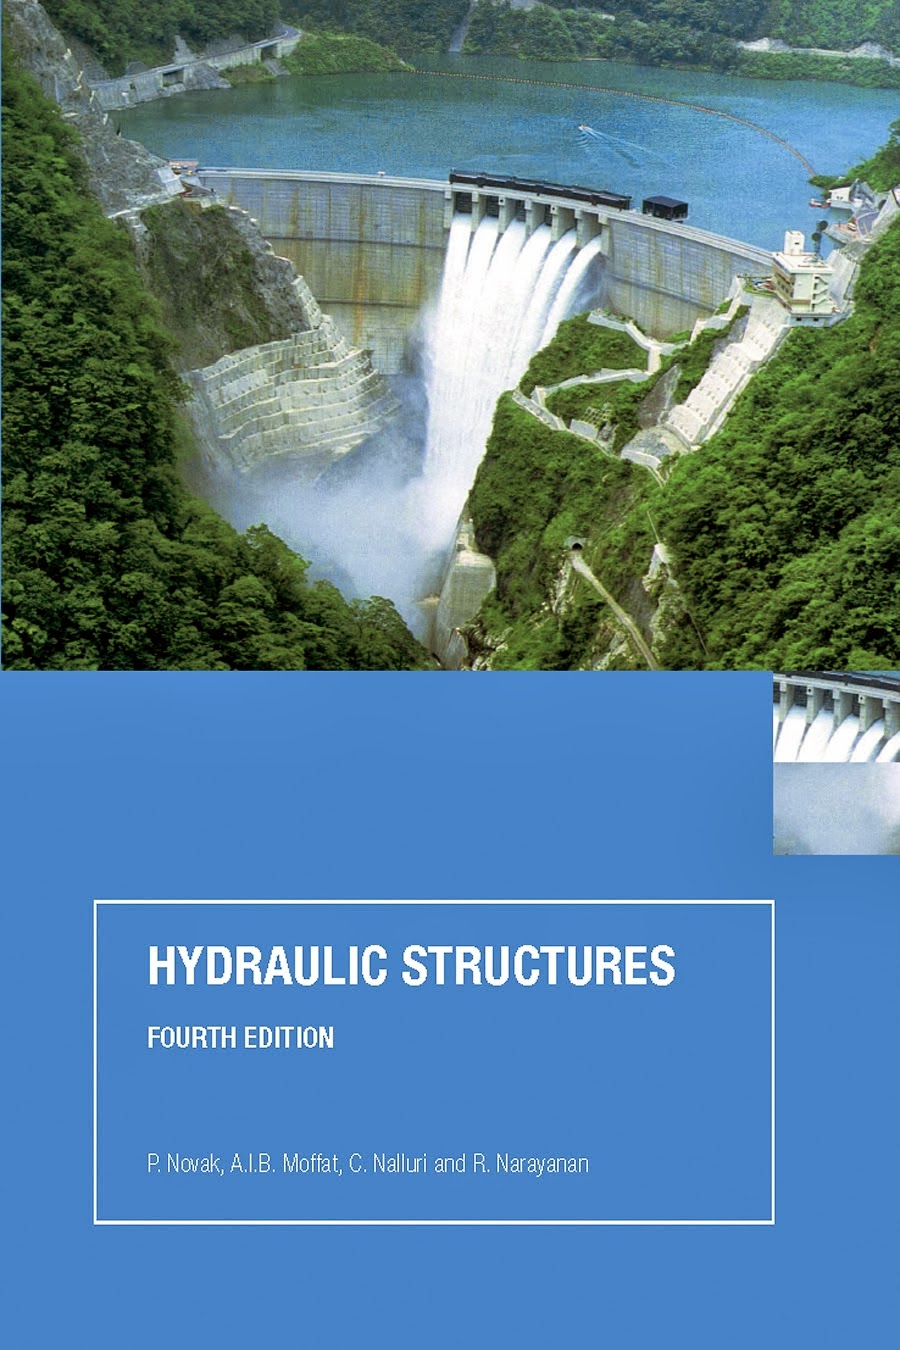 Hydraulic Structures 4th Edition by P.Novak